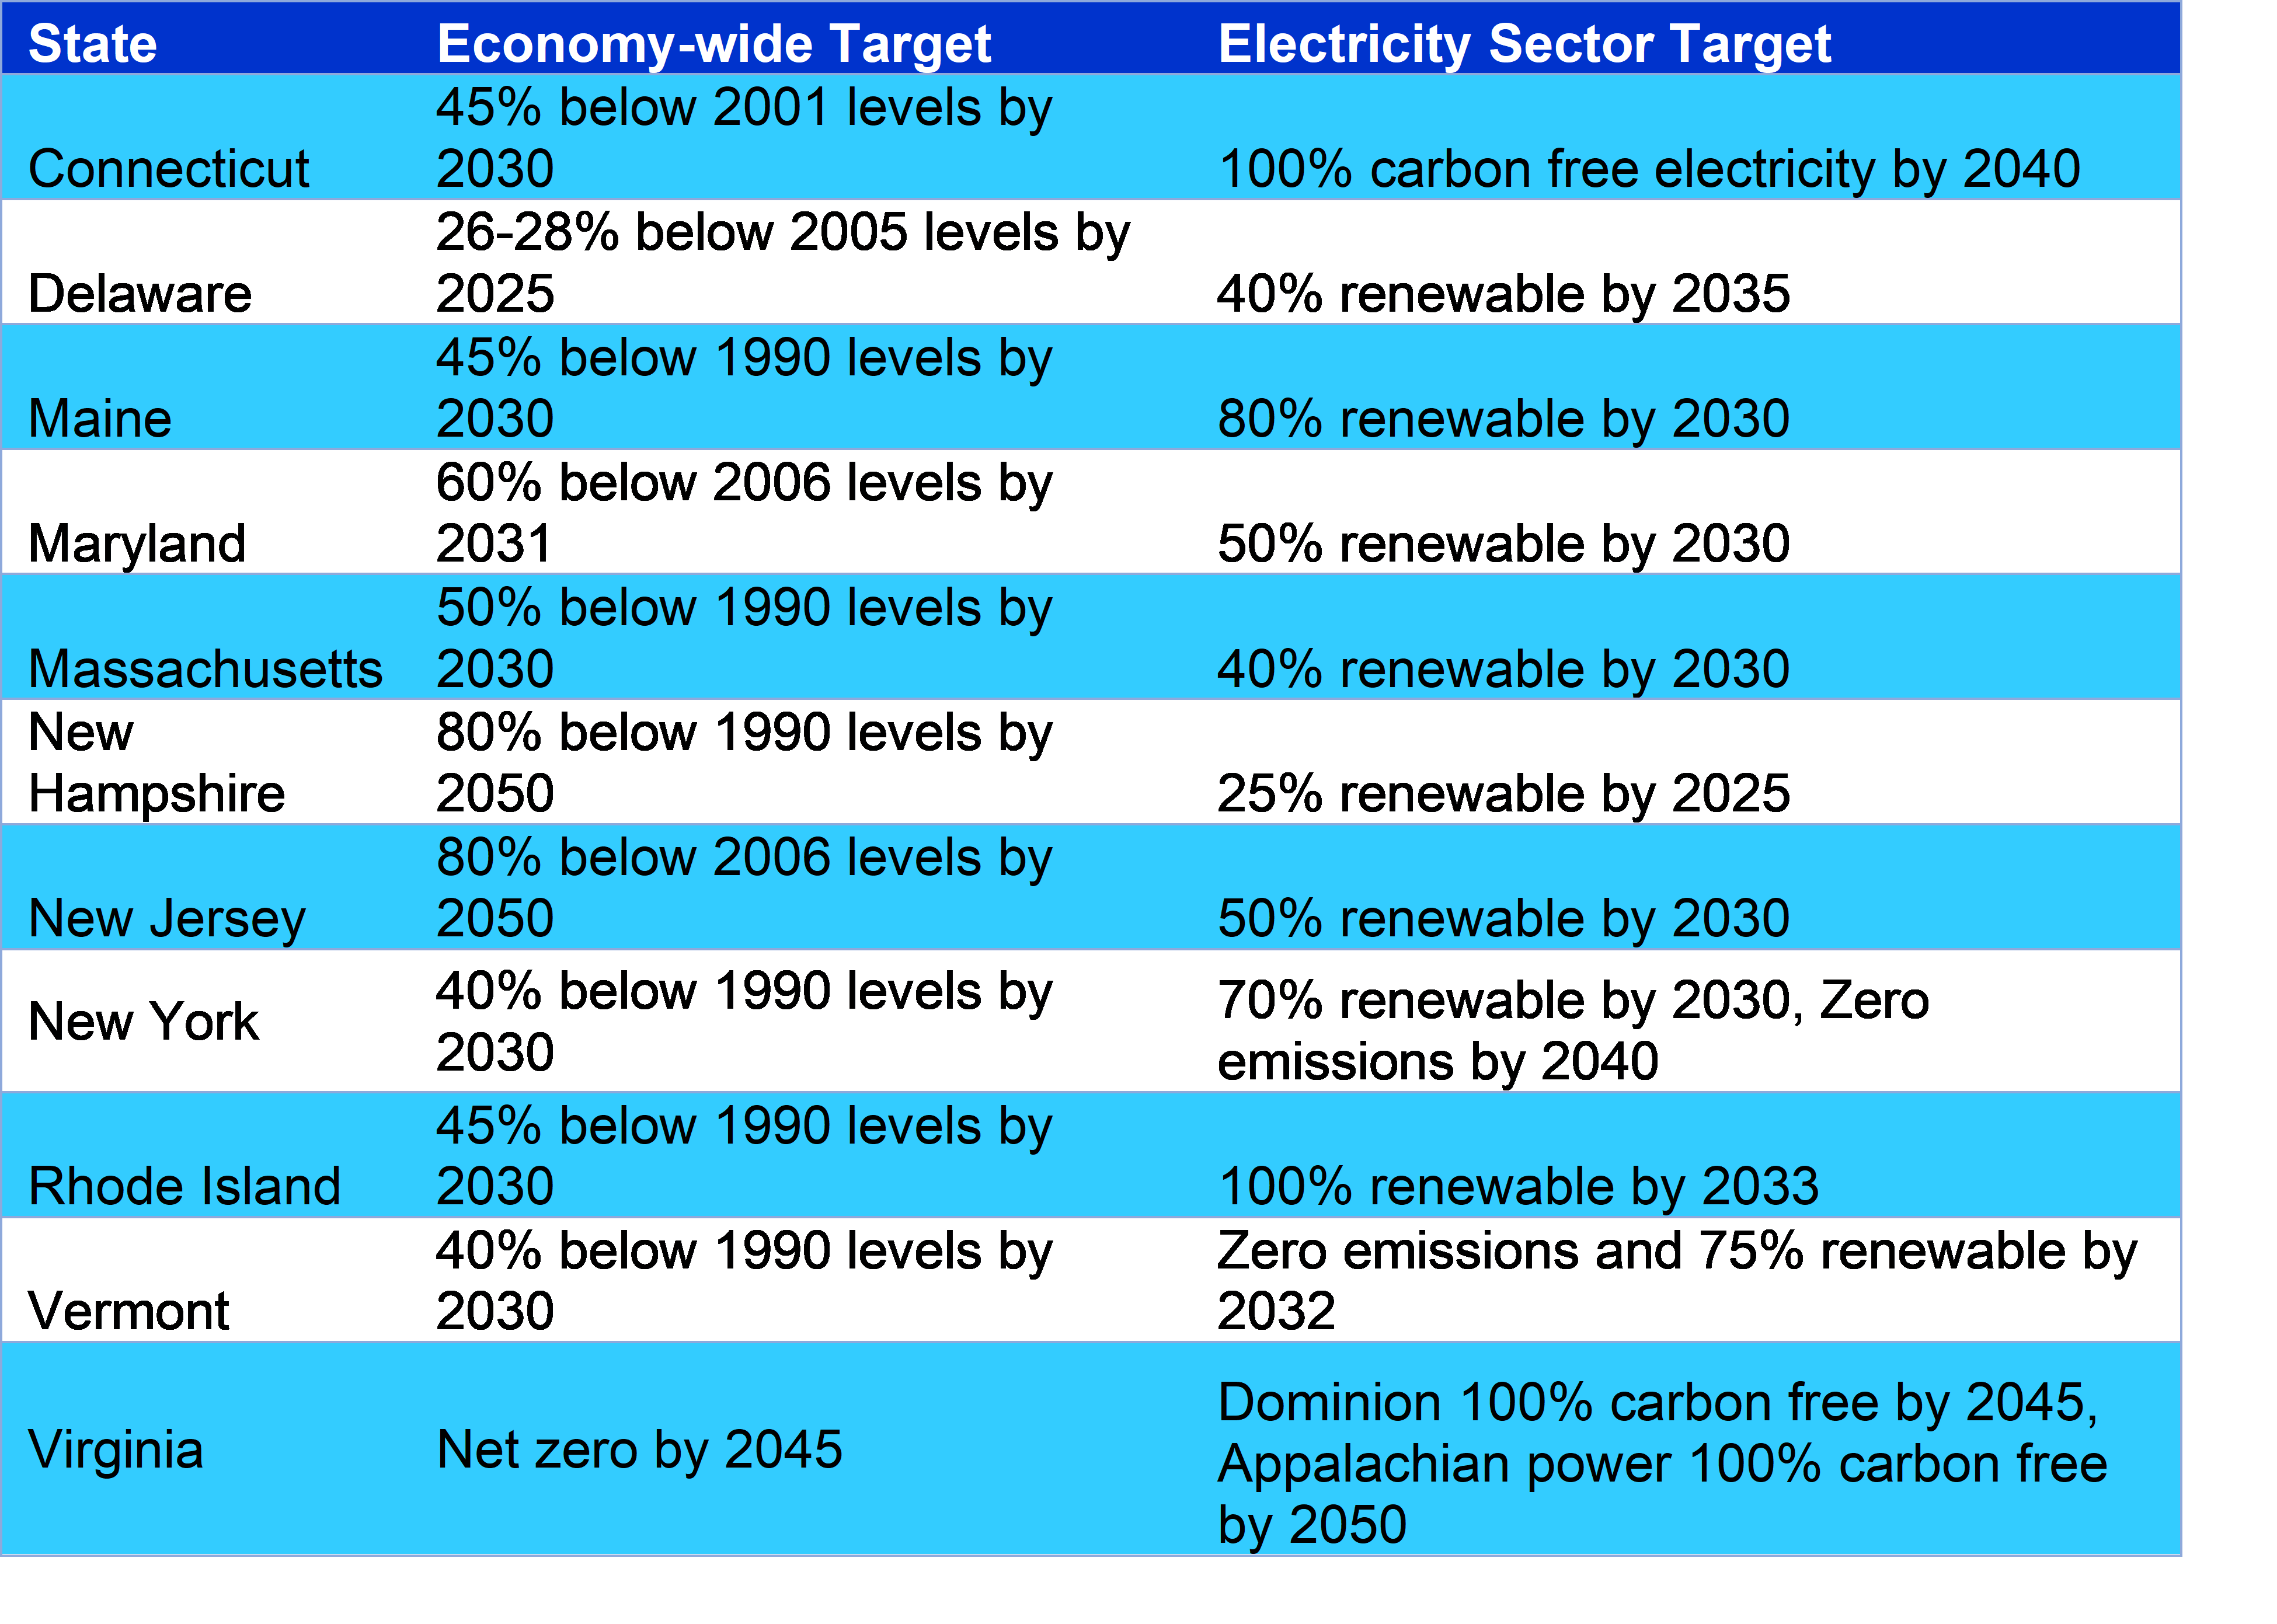 Table of state economy-wide targets and electricity sector targets.